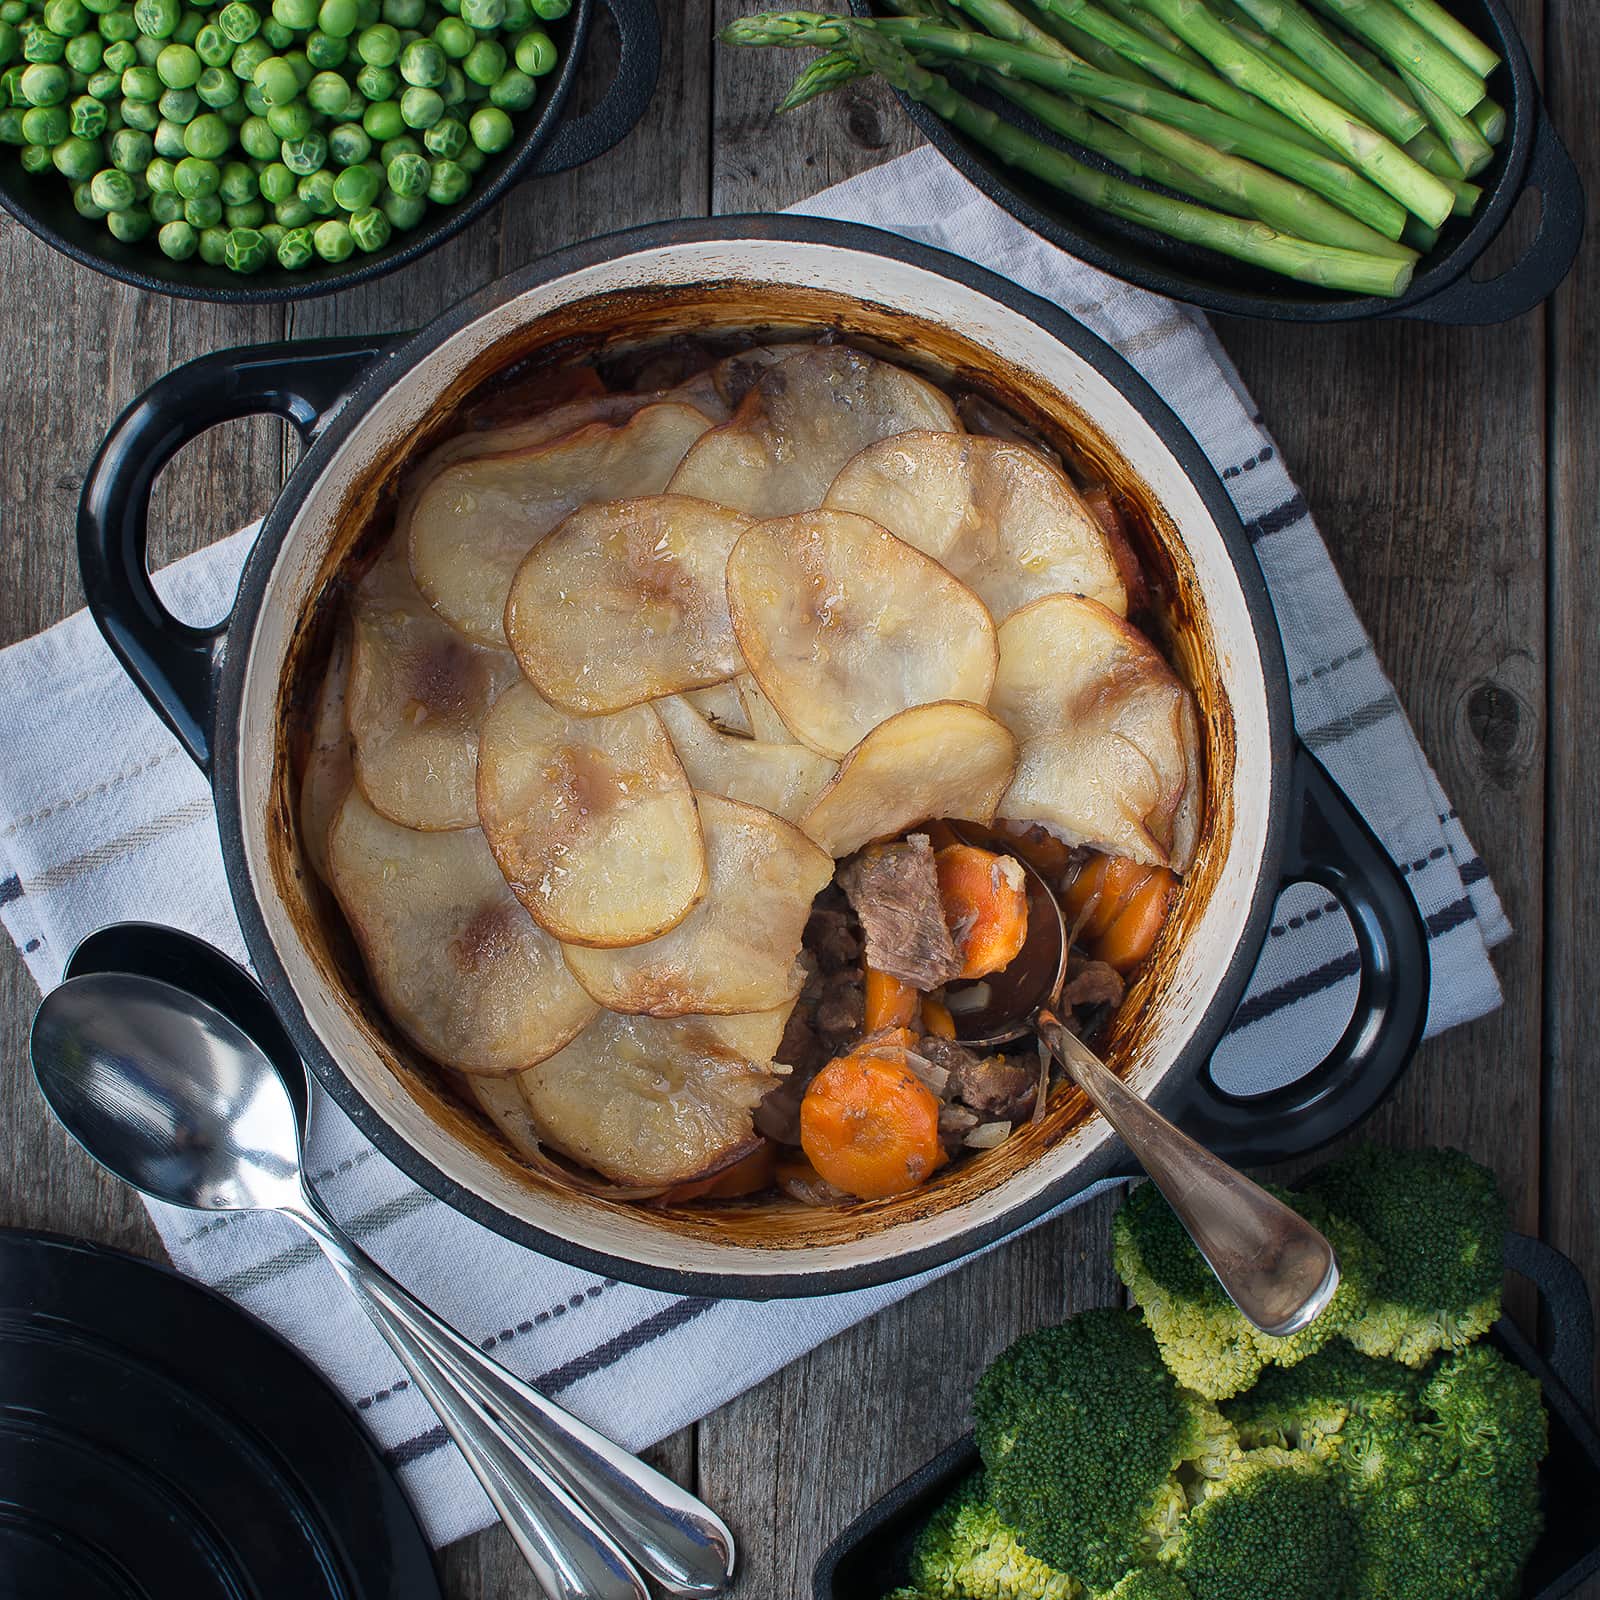 My take on a traditional Lancashire Lamb Hotpot - melt-in-the-mouth lamb and vegetables topped with crisp buttery potatoes.